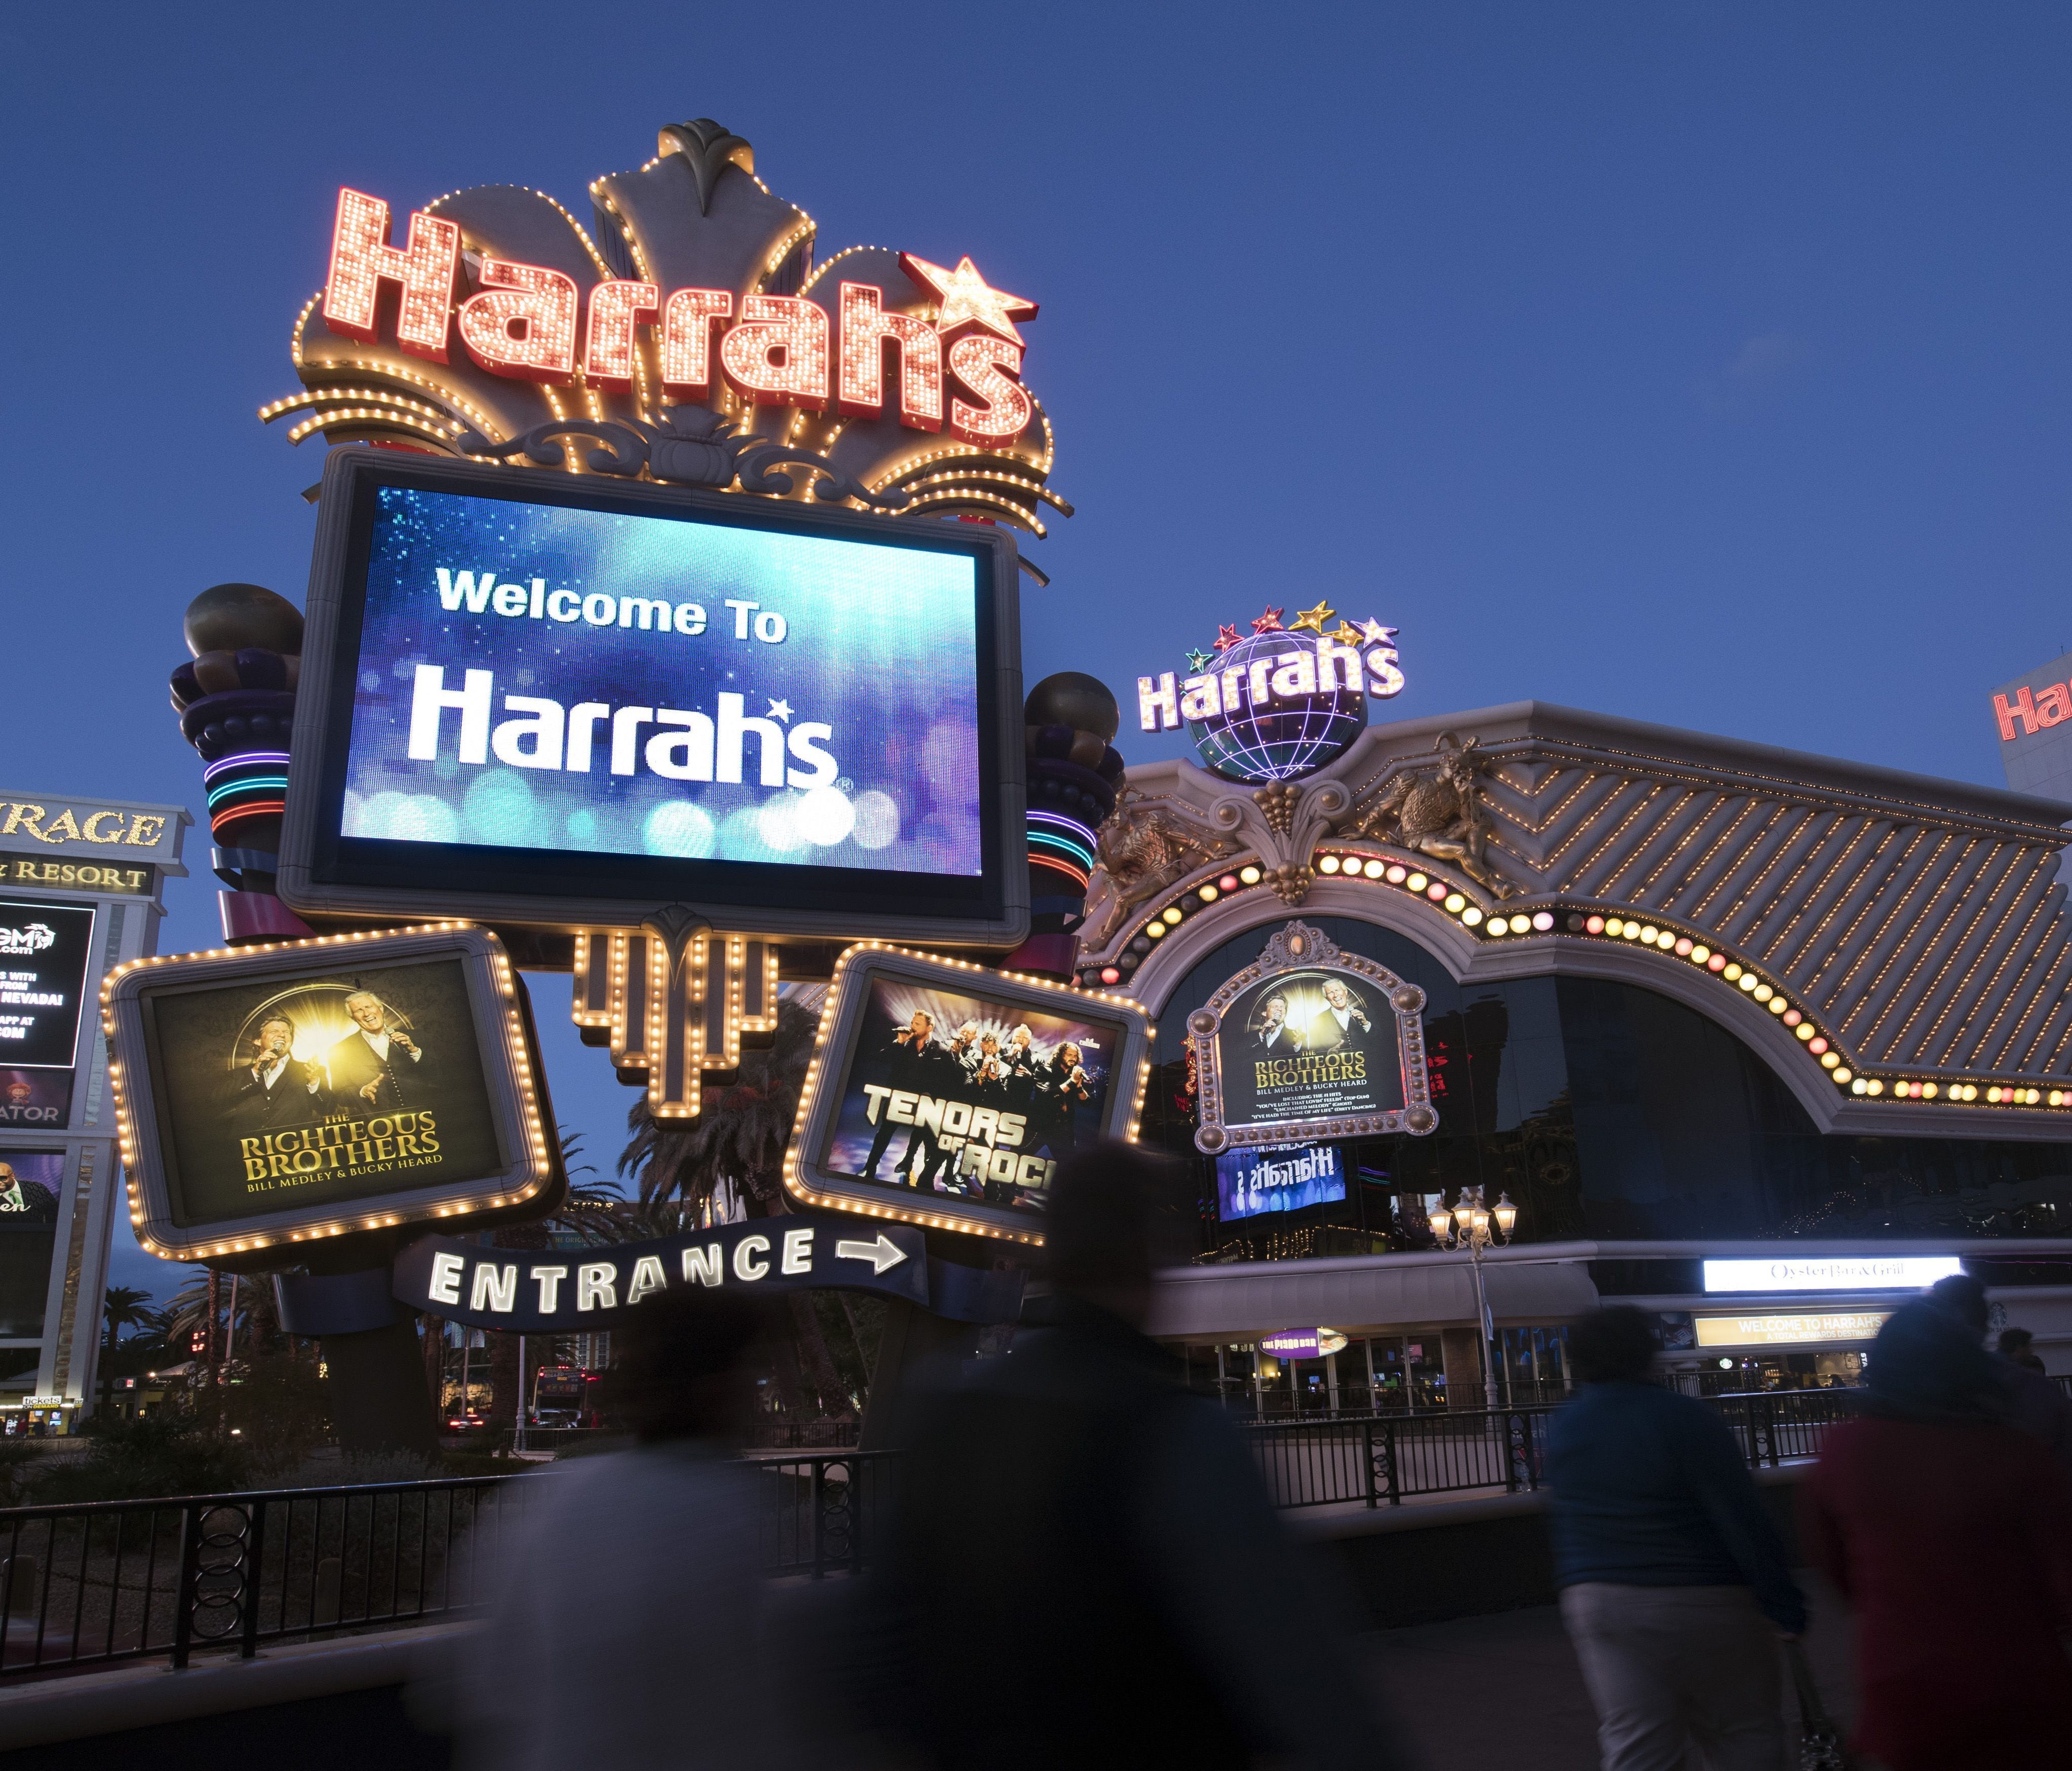 Harrah's Las Vegas Hotel and Casino features more than 2,500 rooms and suites, and a 87,000-square-foot casino.